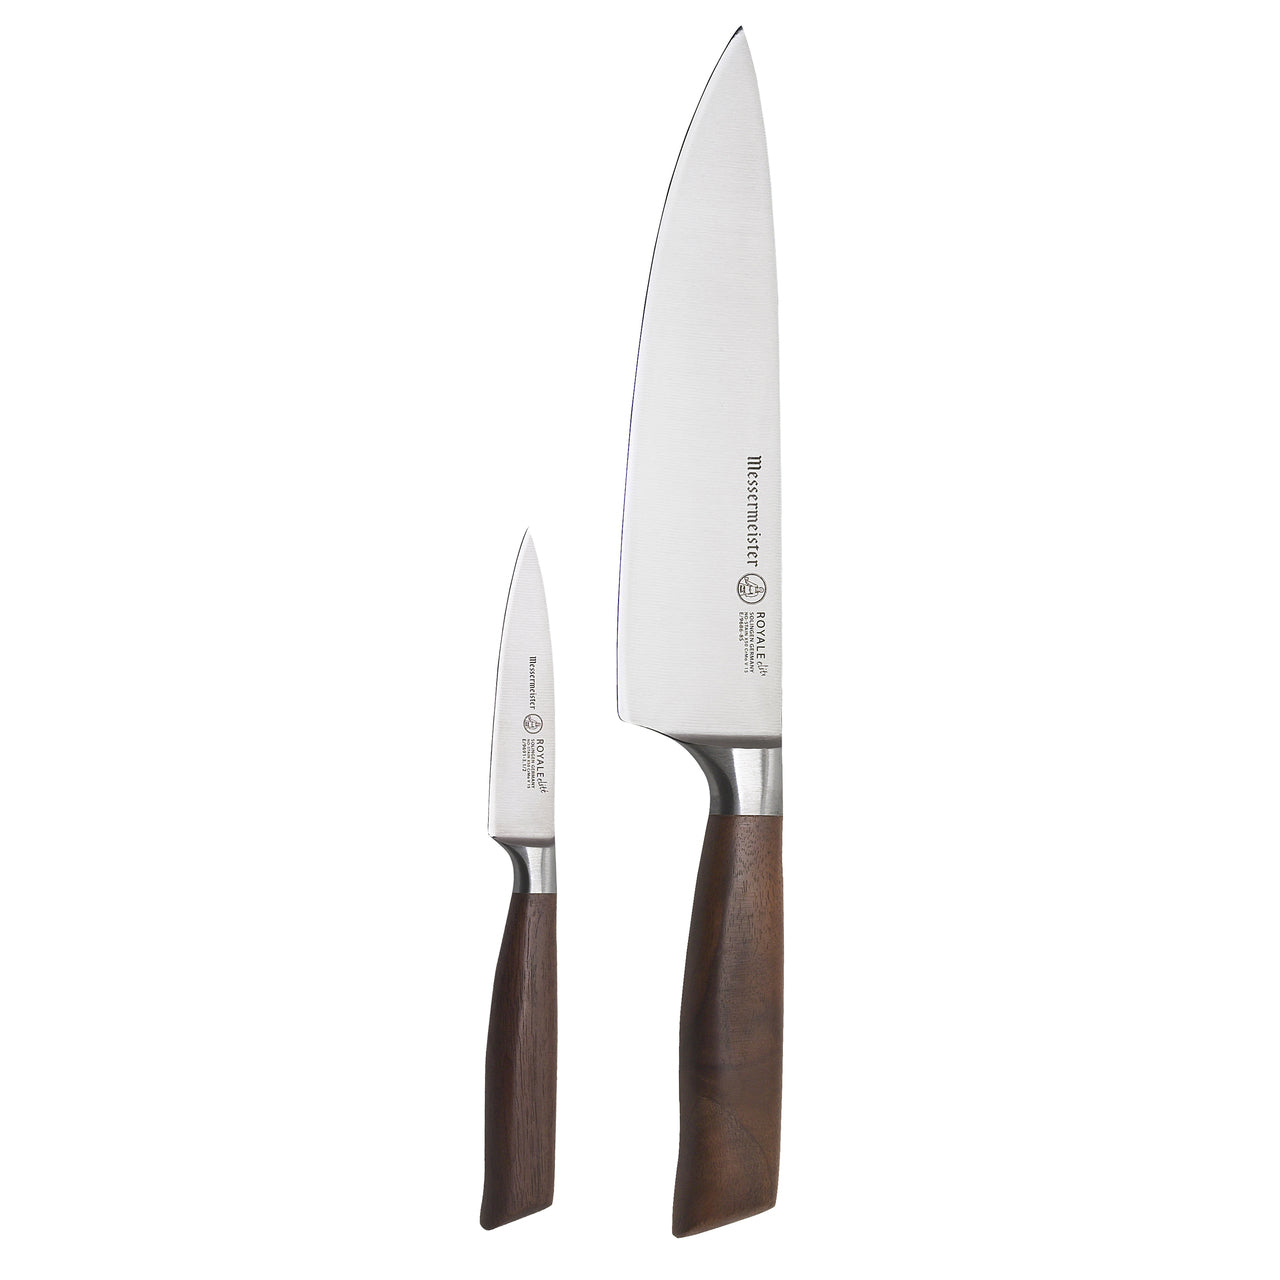 BEON.COM.AU E9000 2CP         Royal Elite 2 Piece Chef &amp; Parer Set This two piece set consists of the Messermeister Royale Elité 8 Inch Stealth Chef's Knife (E9686 8S) and Royale Elité 3.5 Inch Paring Knife (E9691 3). They are the two most widely used knives in the kitchen.  Features The German 1... Messermeister at BEON.COM.AU